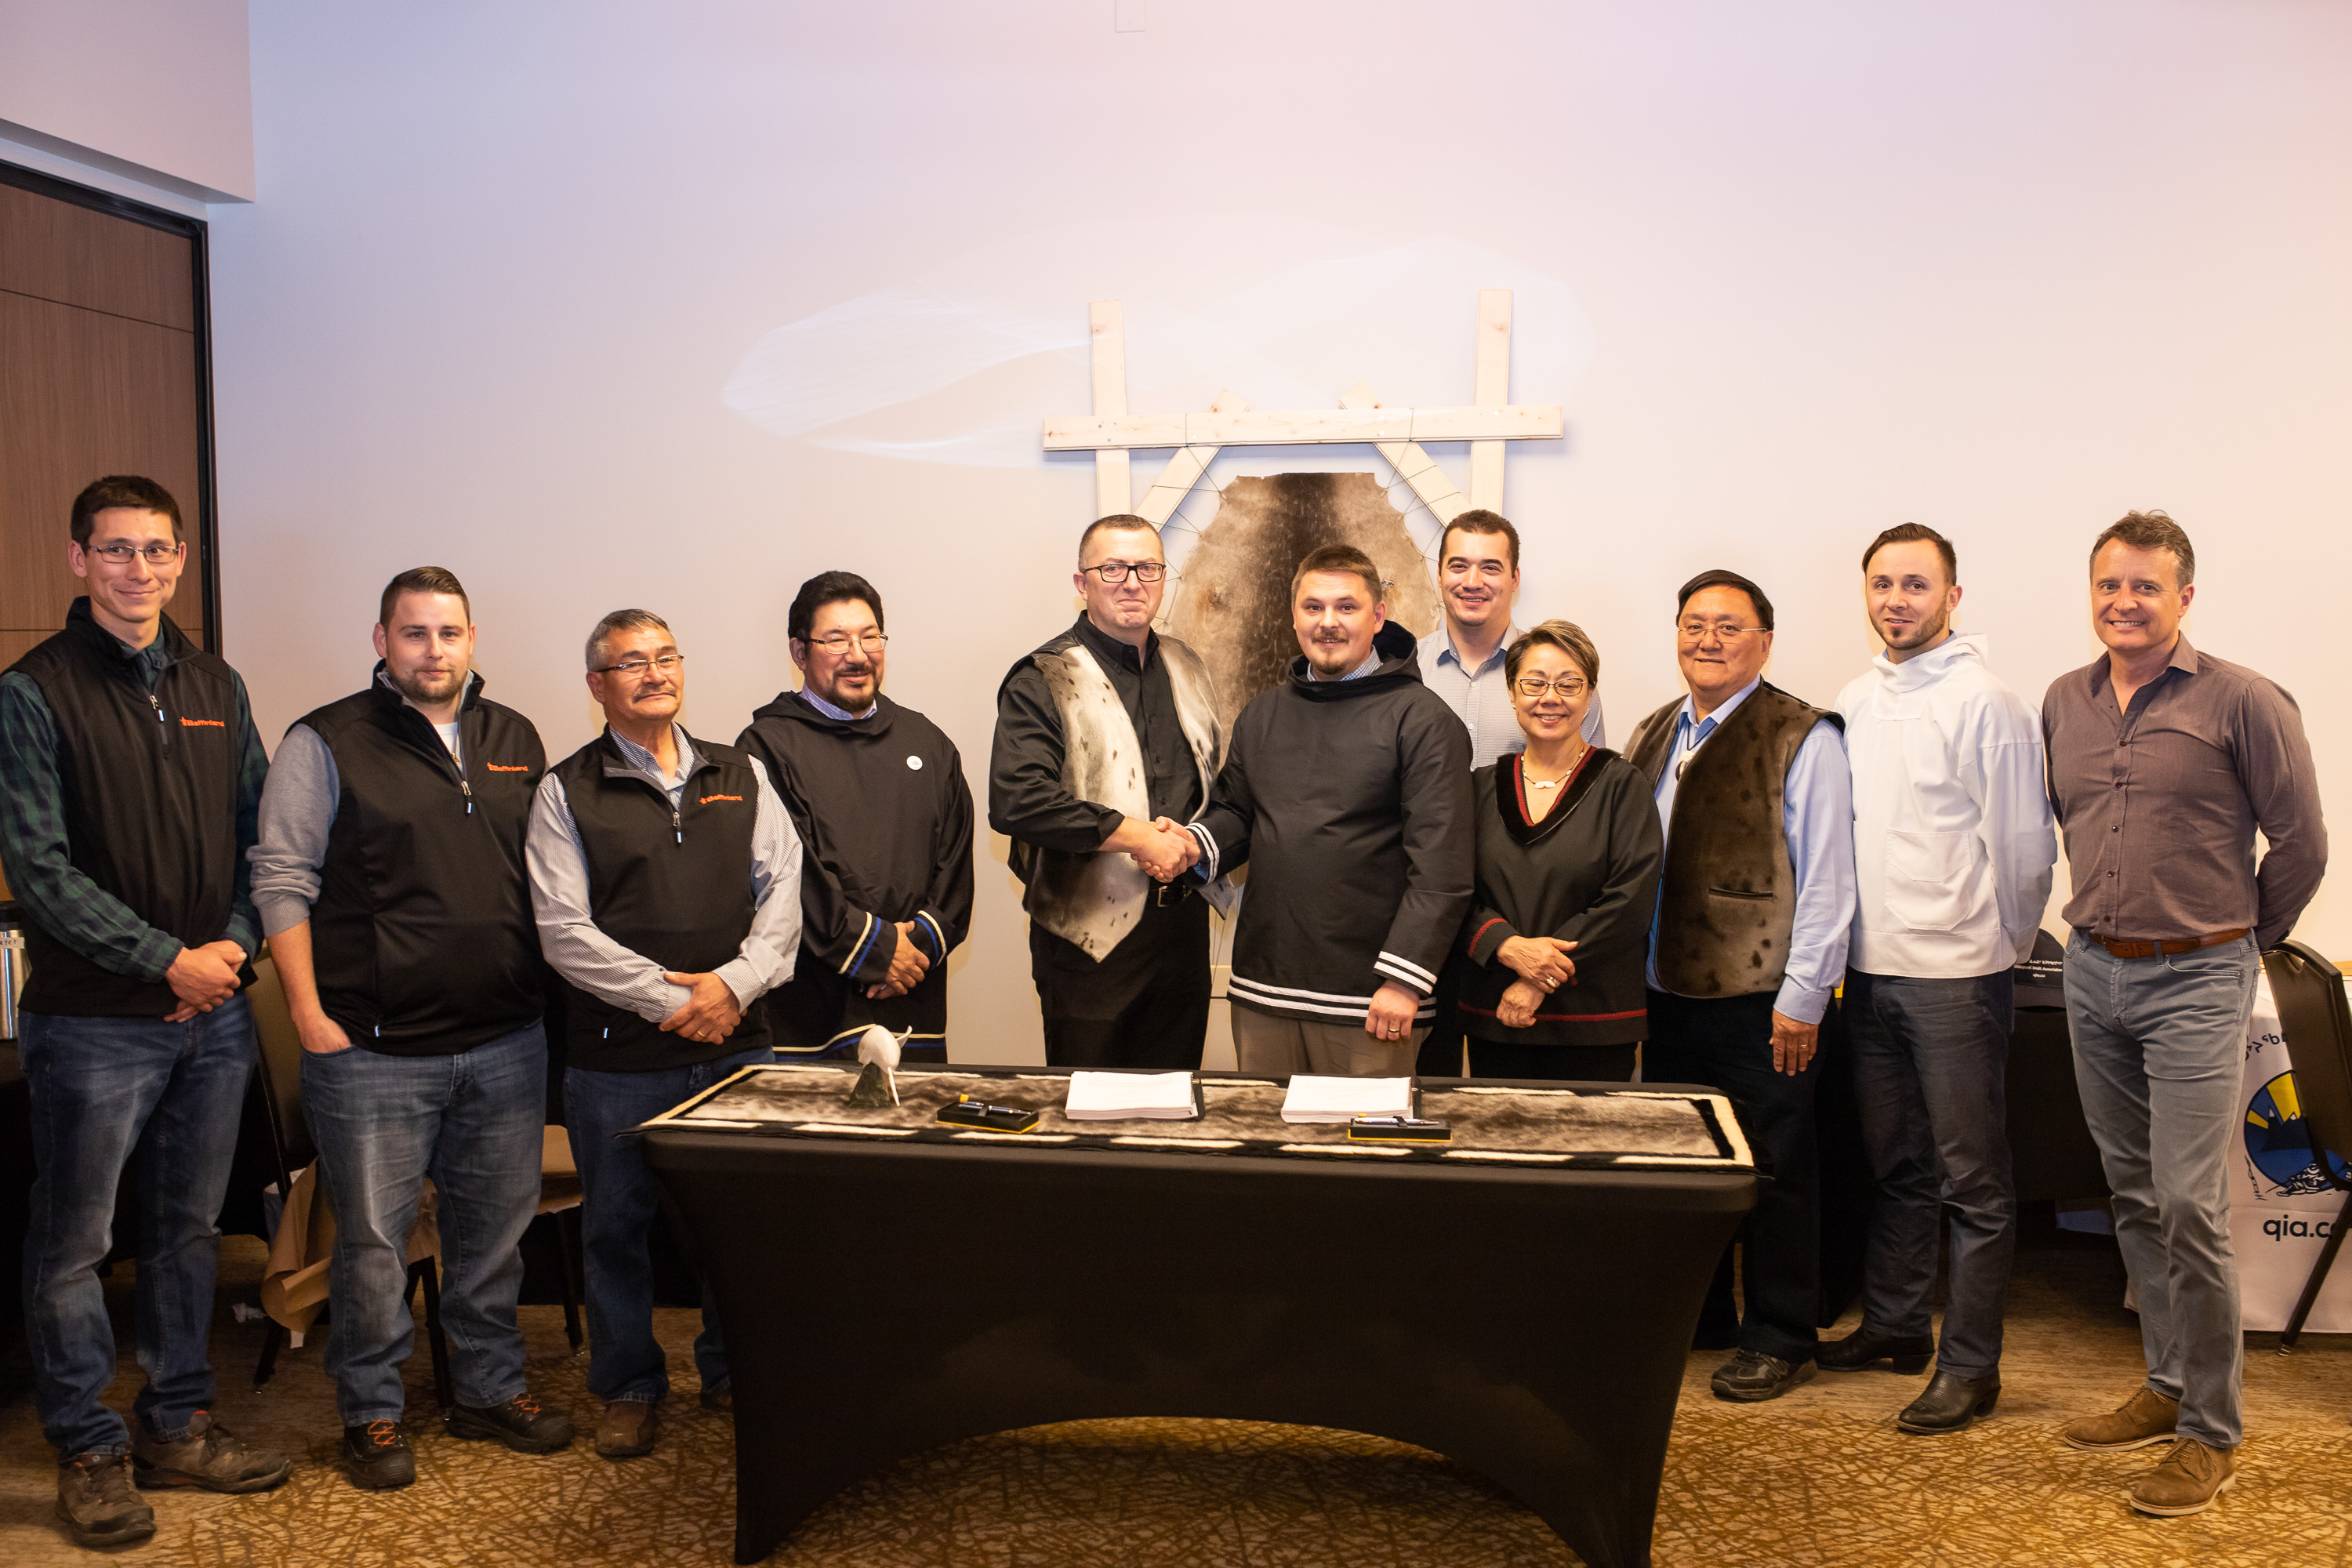 Baffinland Iron Mines Corporation President and CEO Brian Penney (center left) is pictured with P.J. Akeeagok, President of the Qikiqtani Inuit Association, following the signing of the Amended Mary River Project Inuit Impact Benefit Agreement.